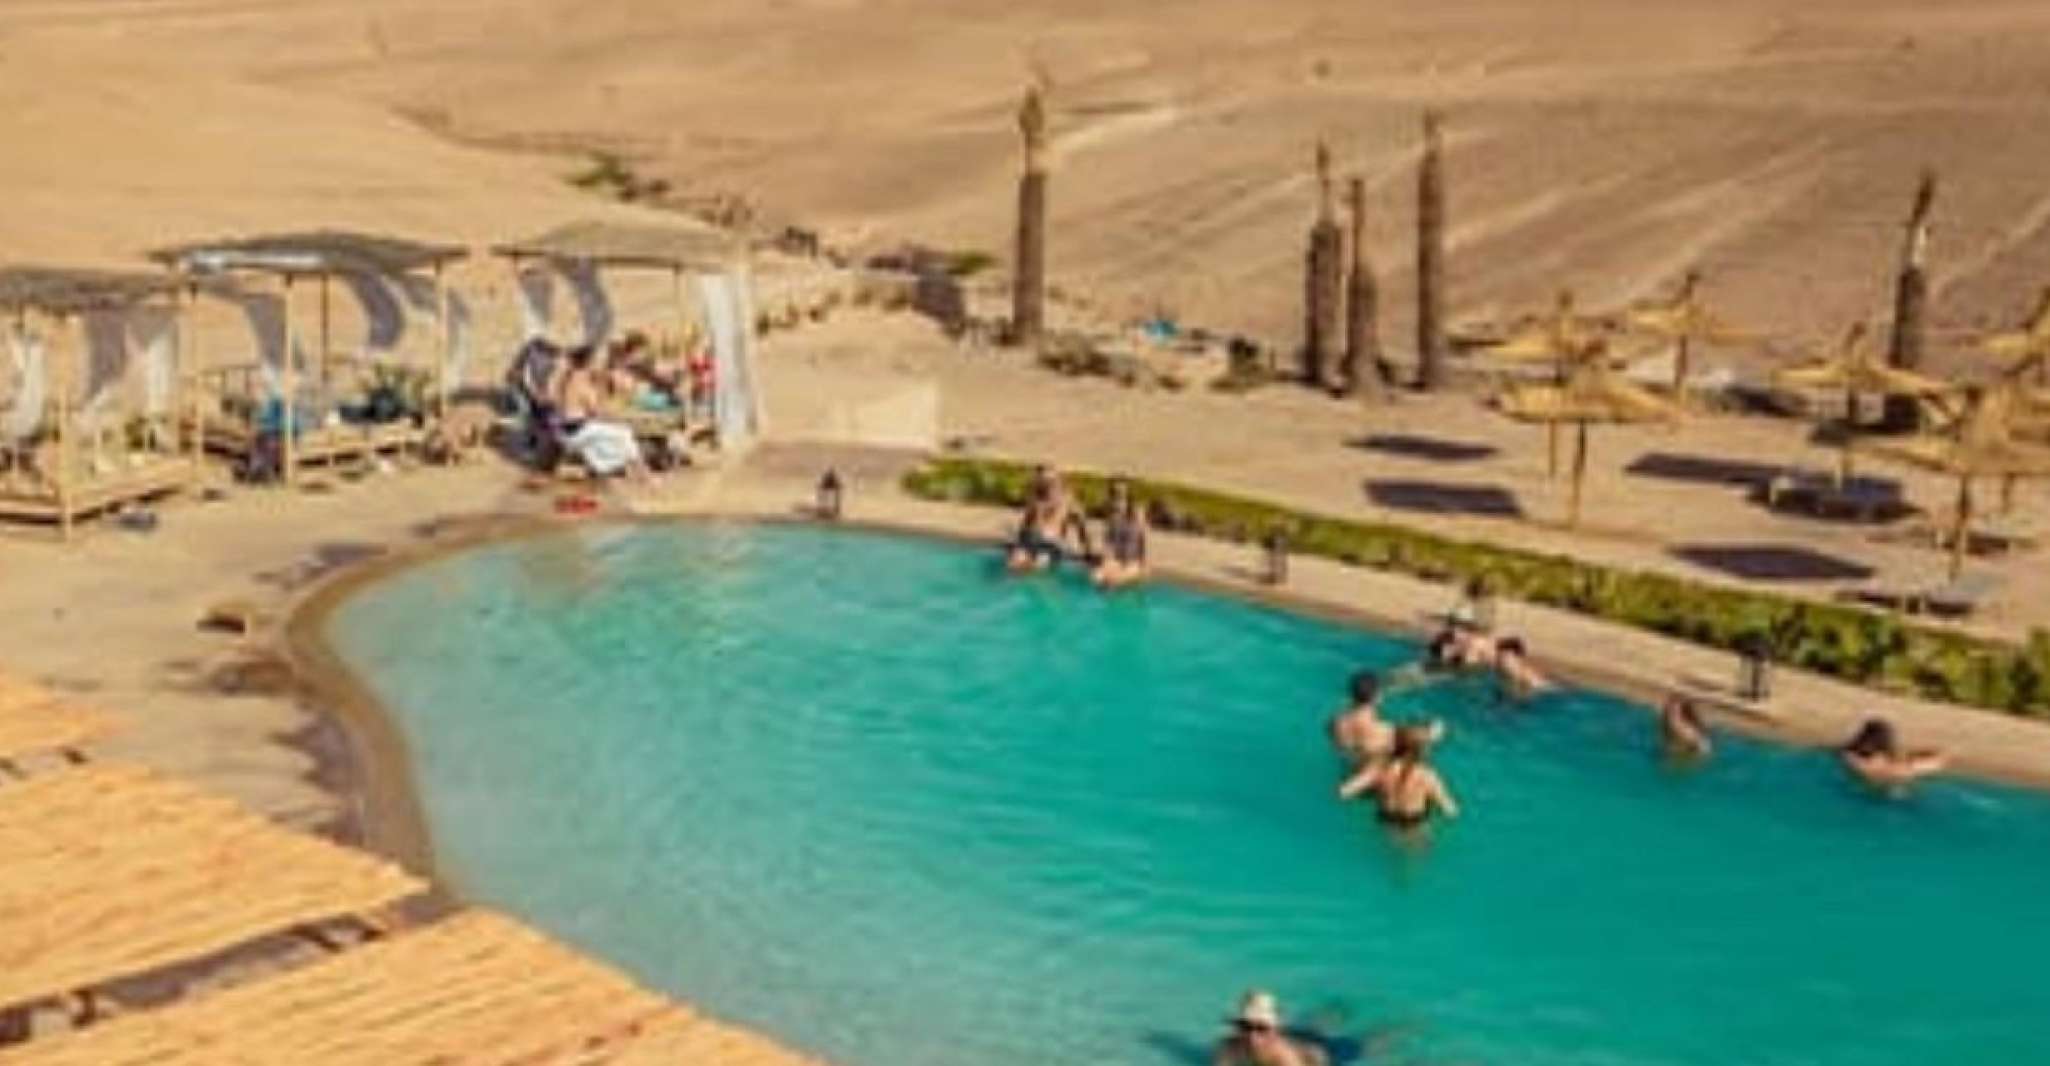 Full day Agafay desert , quad, camel, lunch and pool acces - Housity